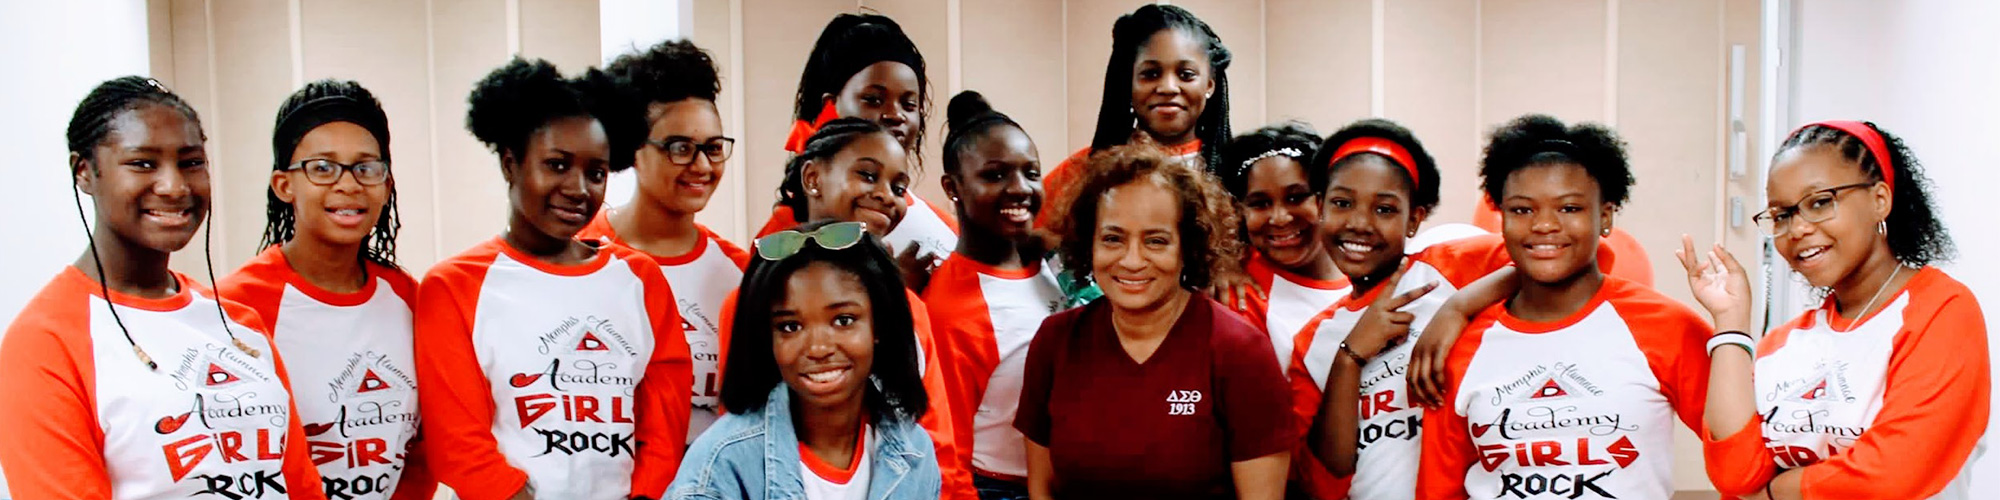 Image of Vera Hawkins with 13 young ladies wearing Memphis Alumnae Academy Girls Rock t-shirts.